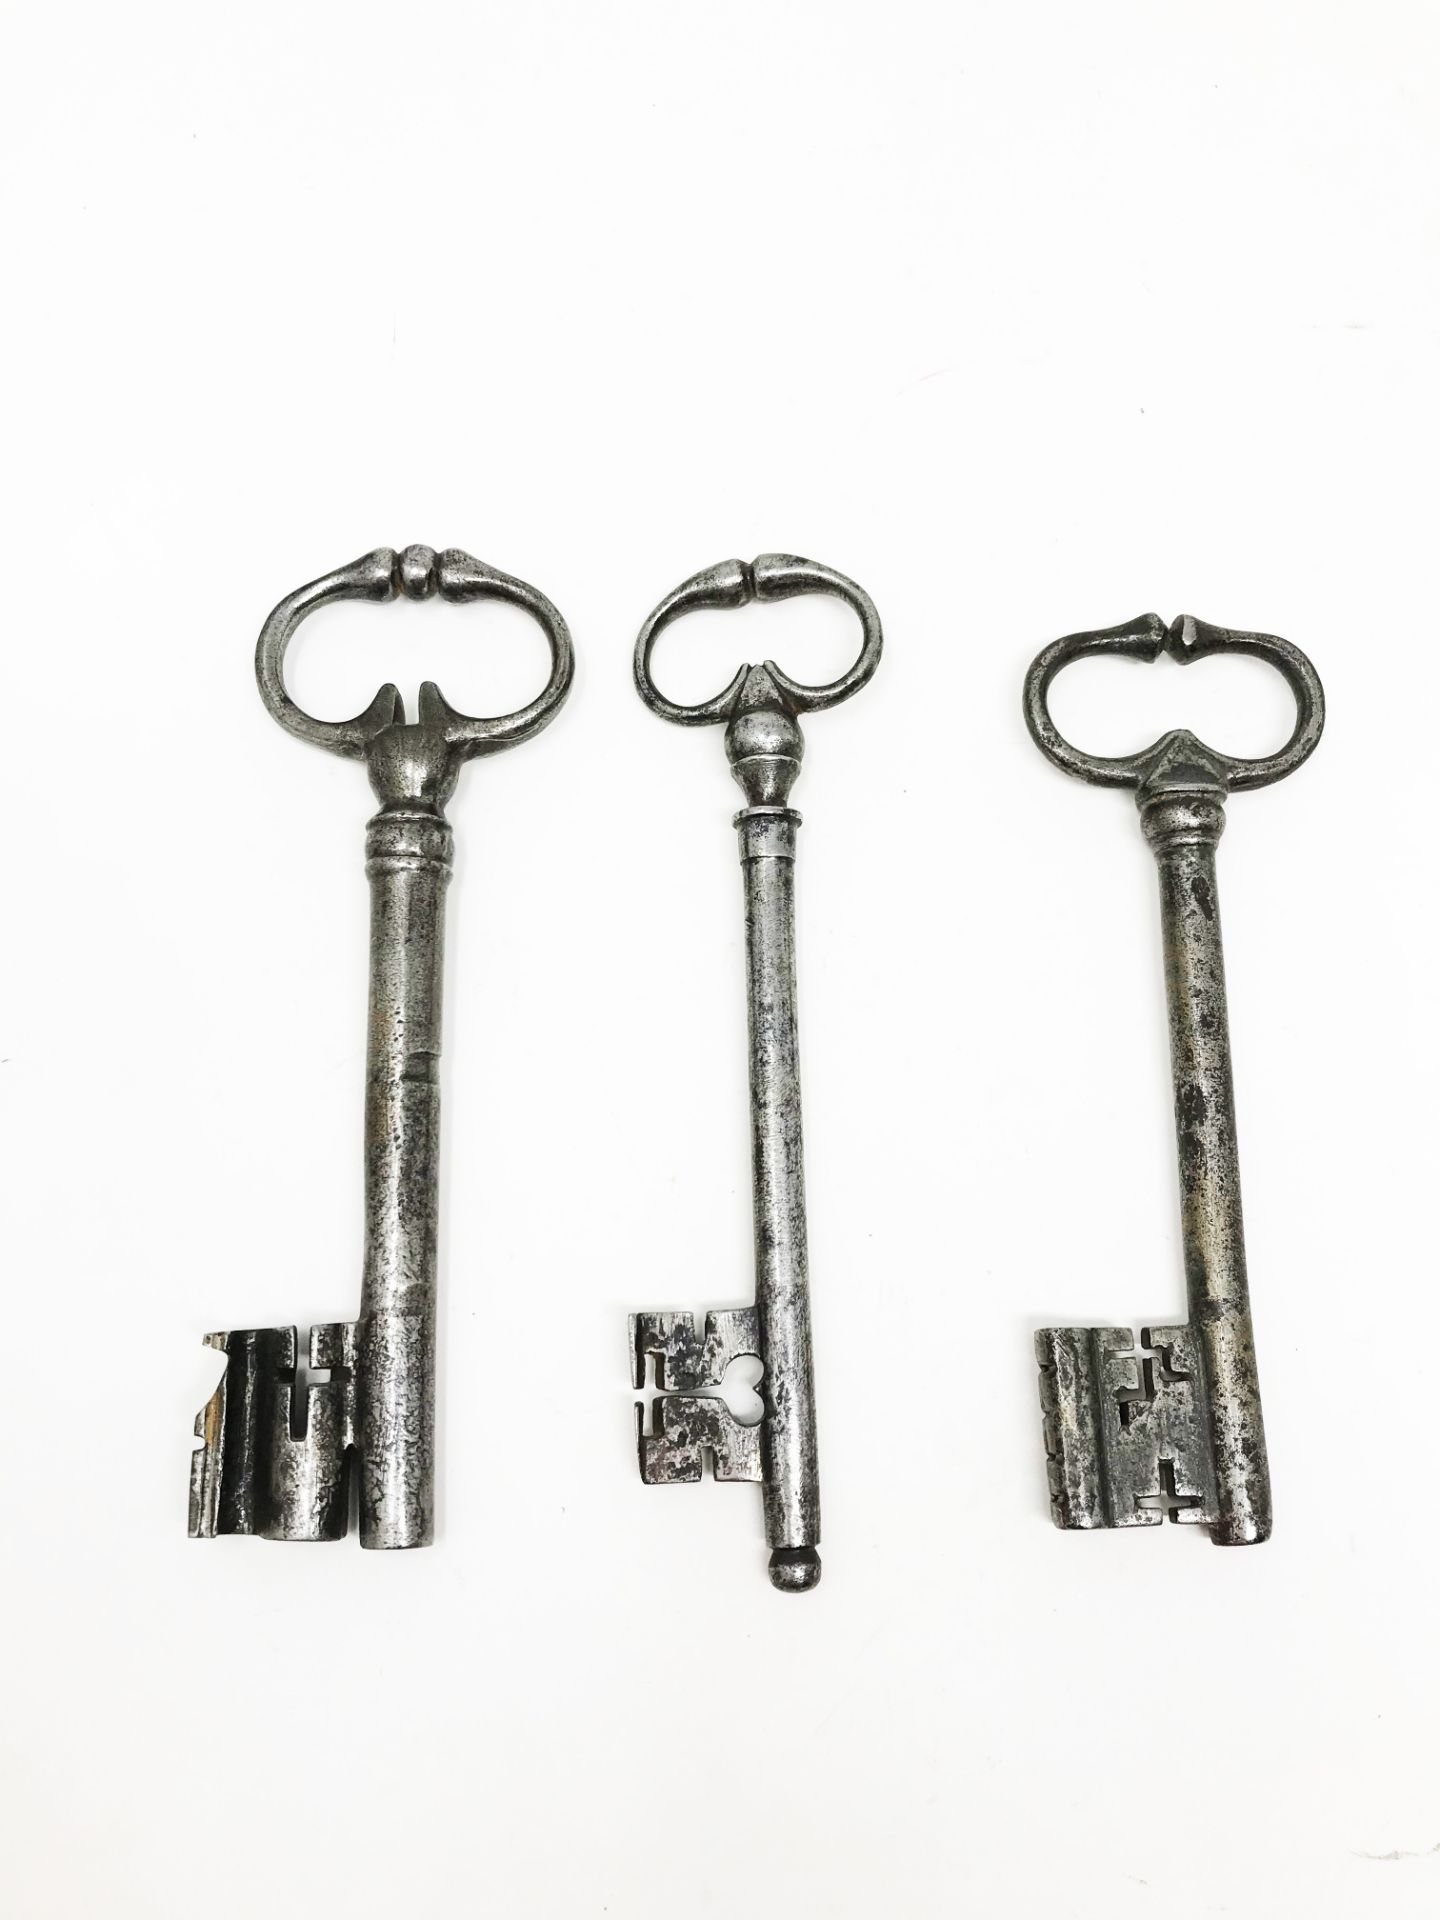 Three keys with frog's legs rings15,18 - 15, 6 - 13, 95 cm Part of the chapter "From Enlightenment